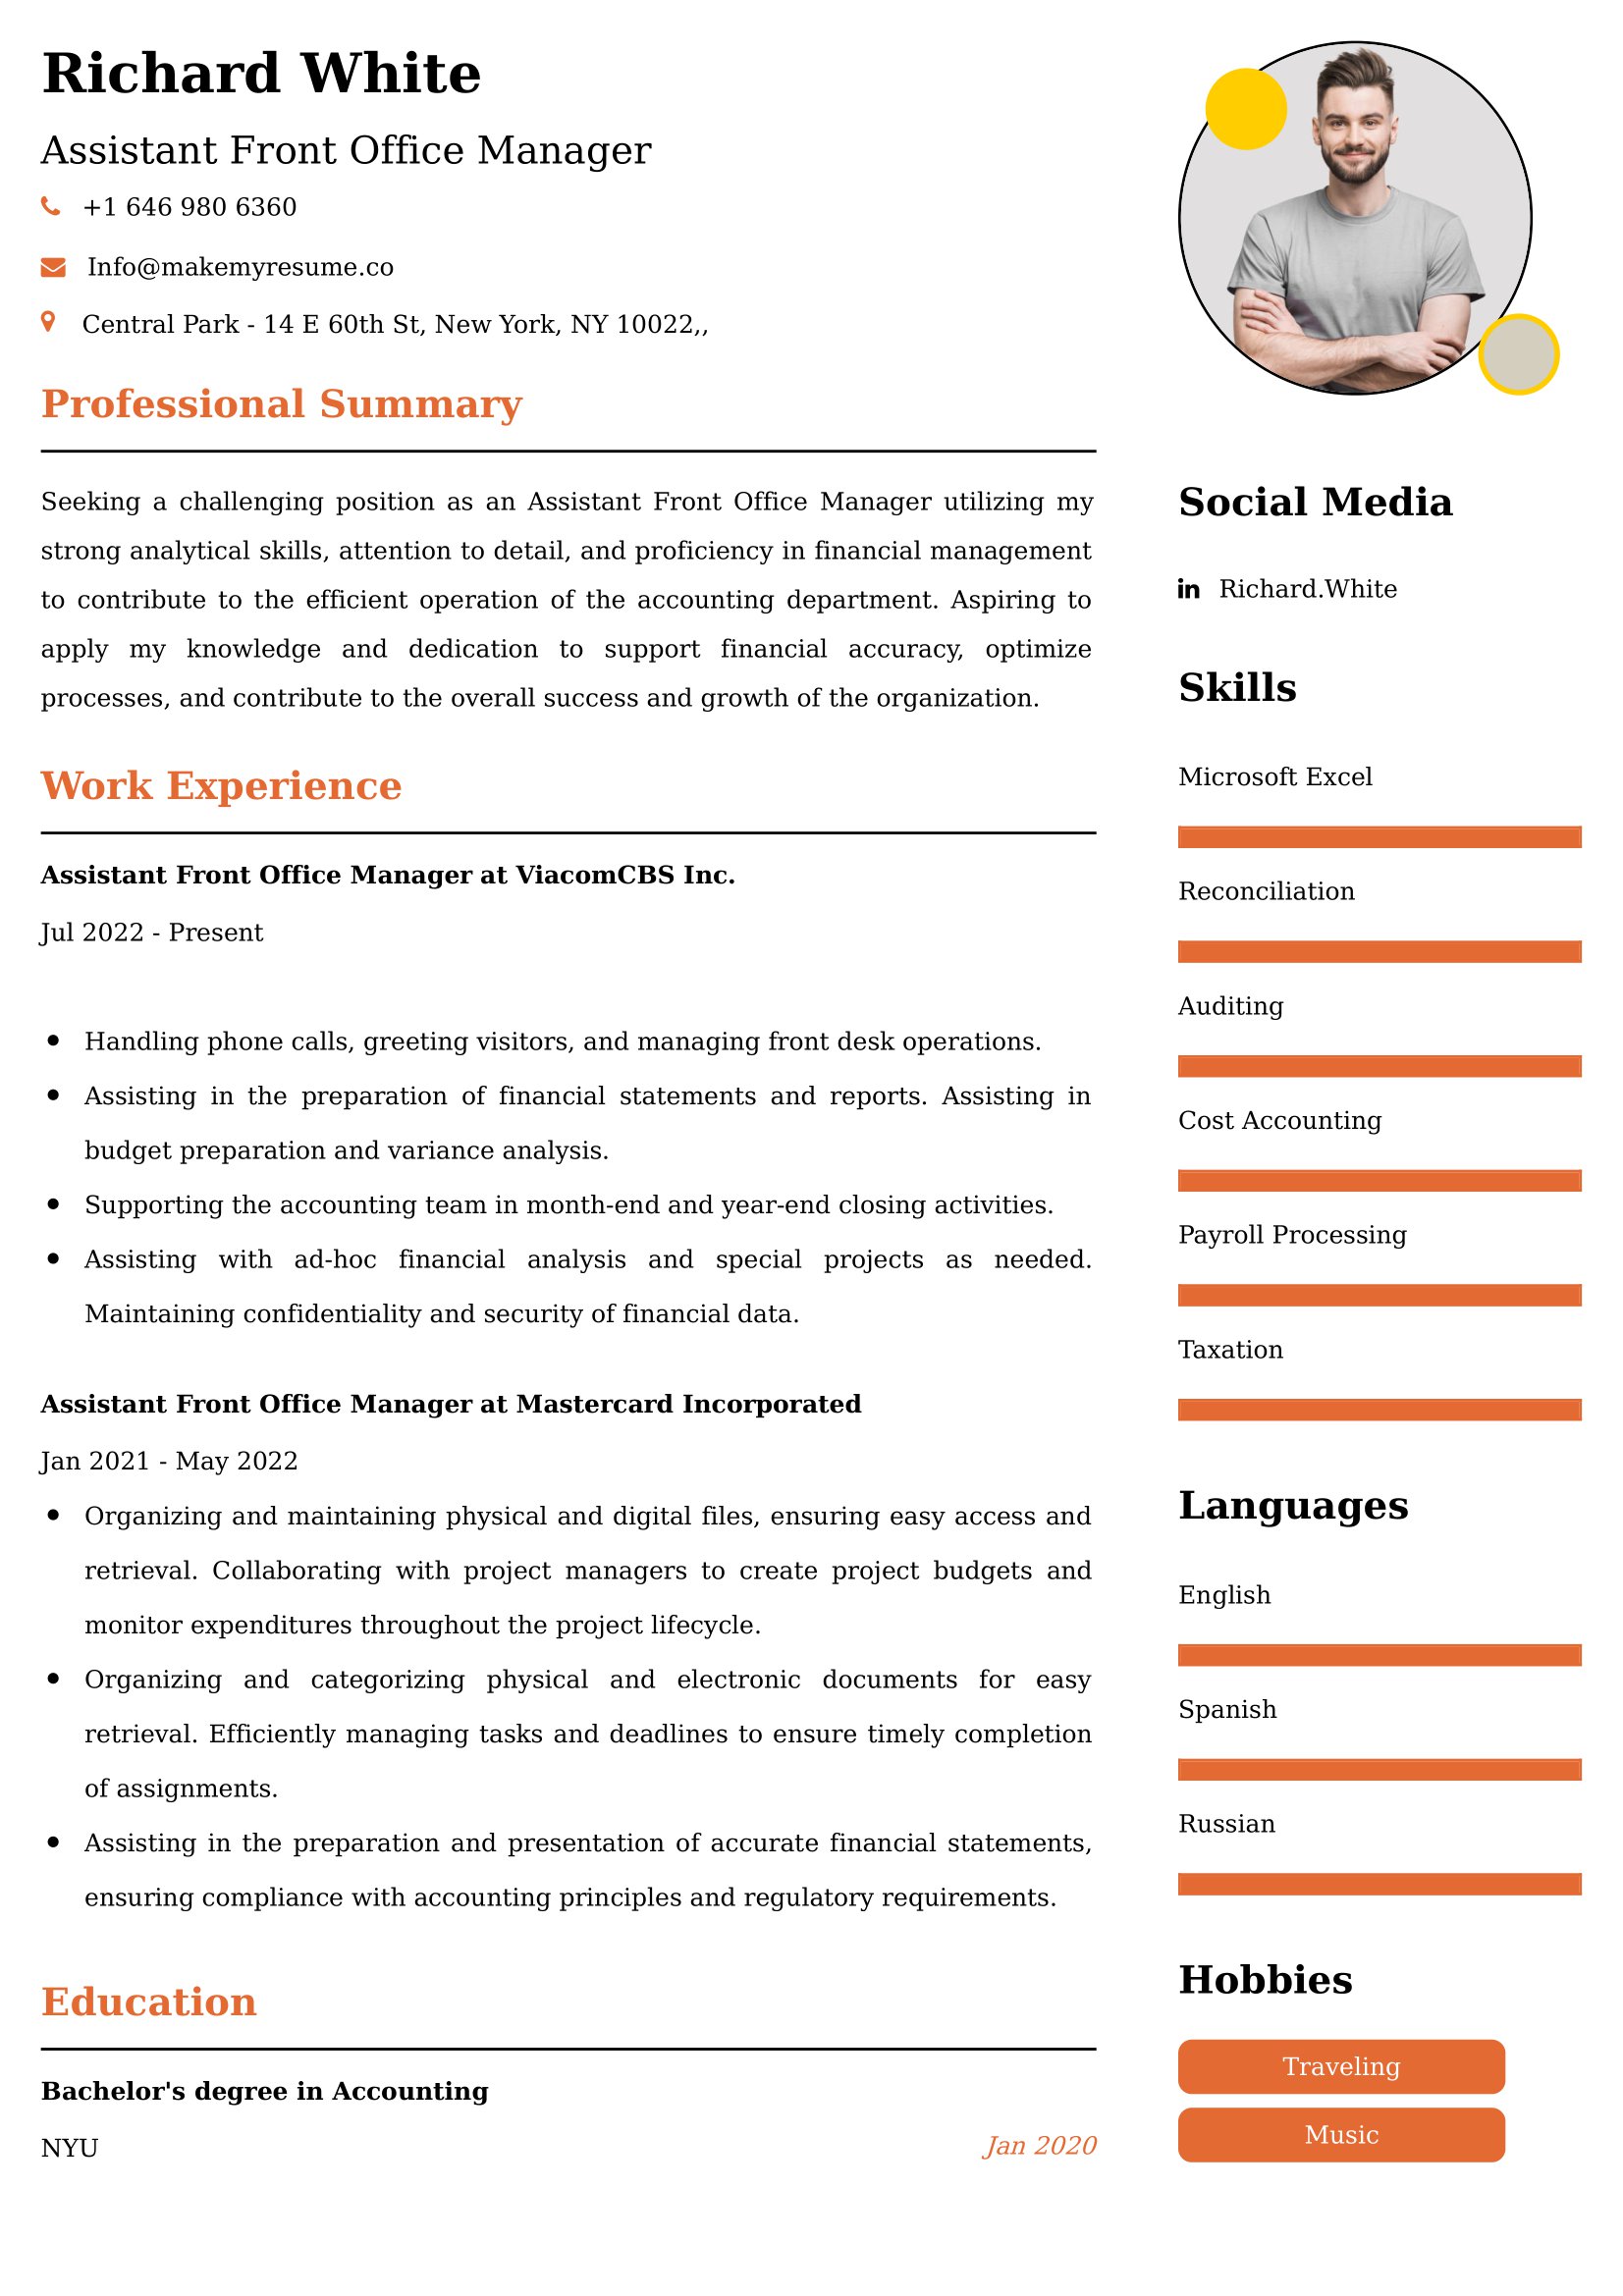 Assistant Front Office Manager Resume Examples - UK Format, Latest Template.